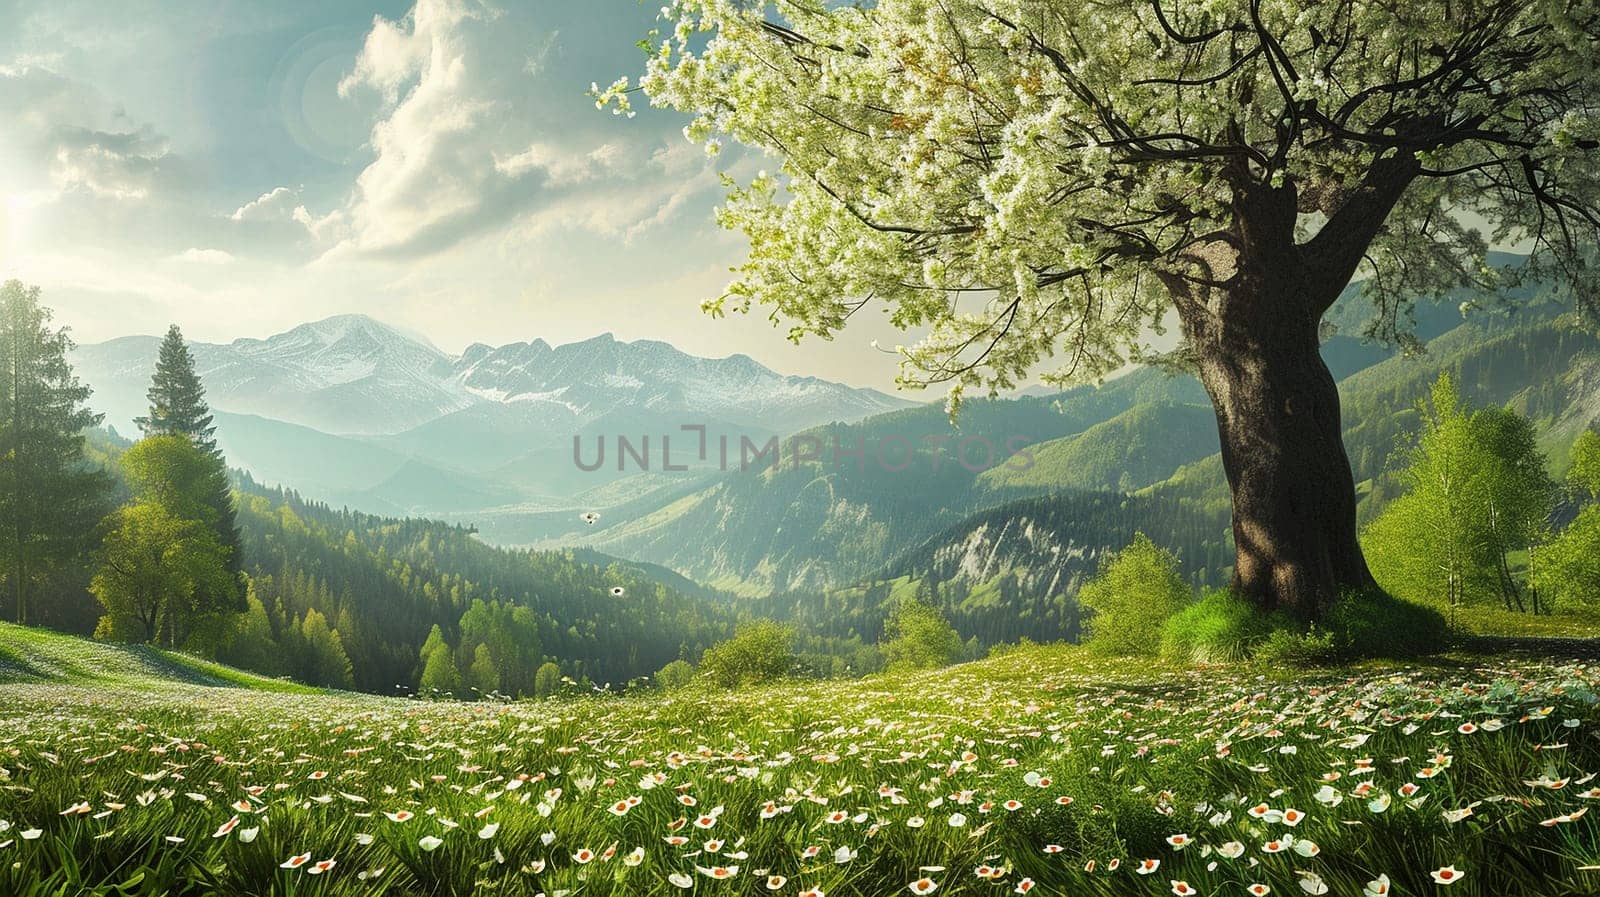 Spring landscape. Fresh foliage, grass. Nature comes to life. spring background for the product. High quality illustration